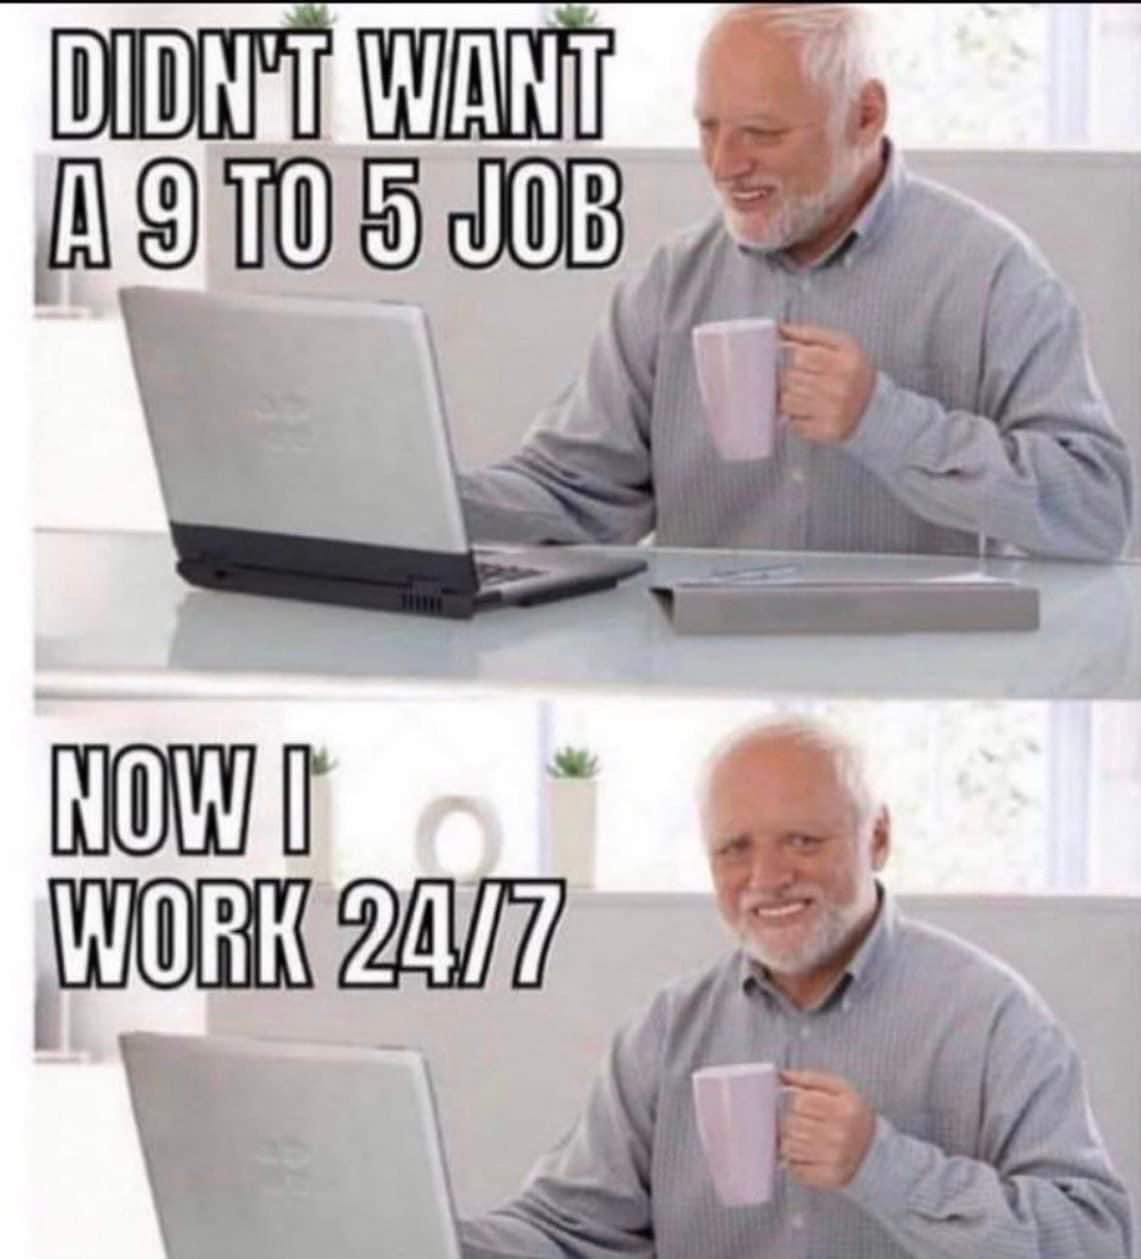 didn’t want a 9 to 5 job, now i work 24 7